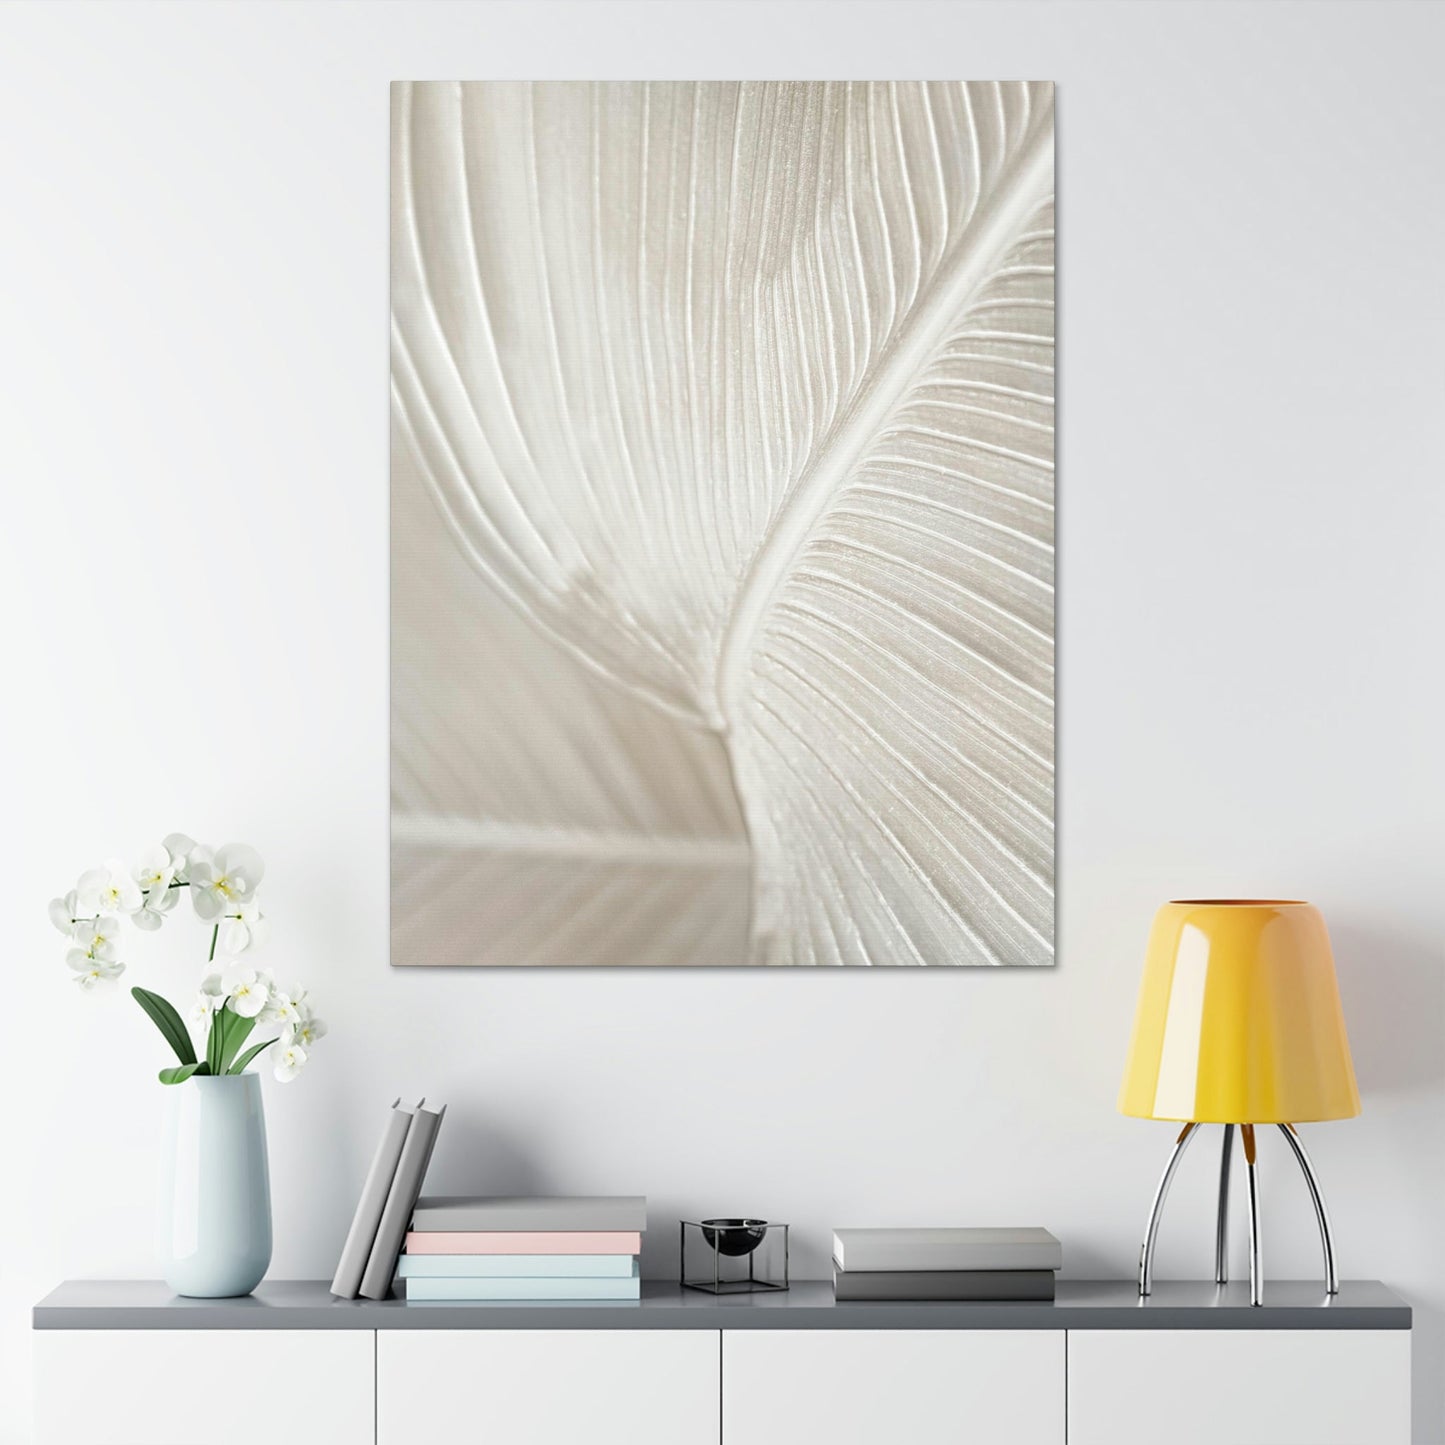 Boho Dreams: A Wall Art that Reflects a Free-Spirited Lifestyle